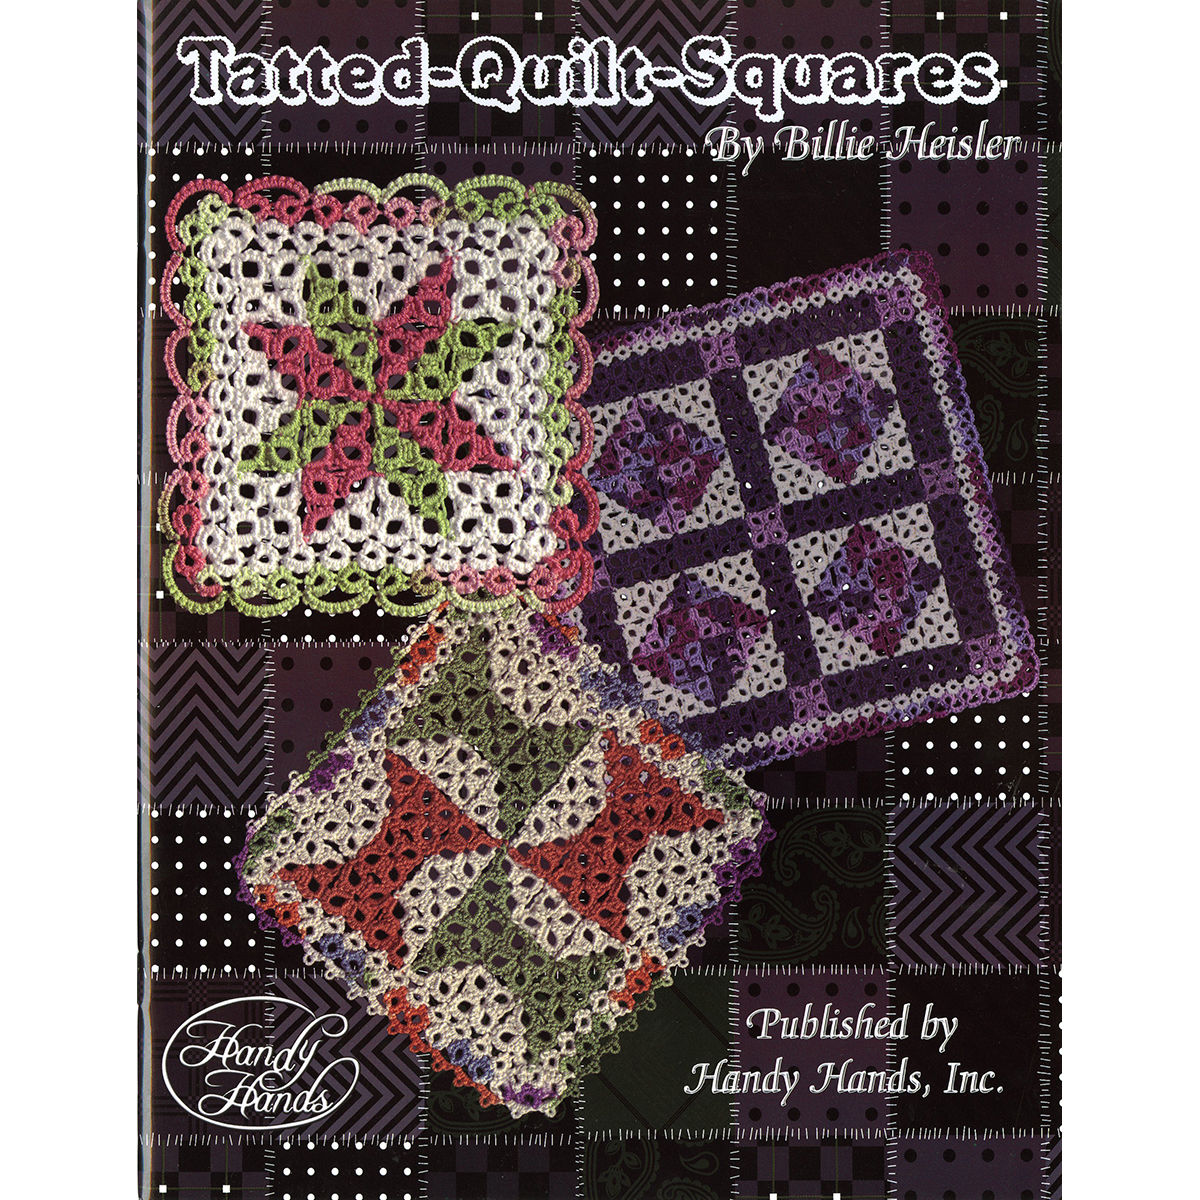 Ha-t438 Tatted Quilt Squares